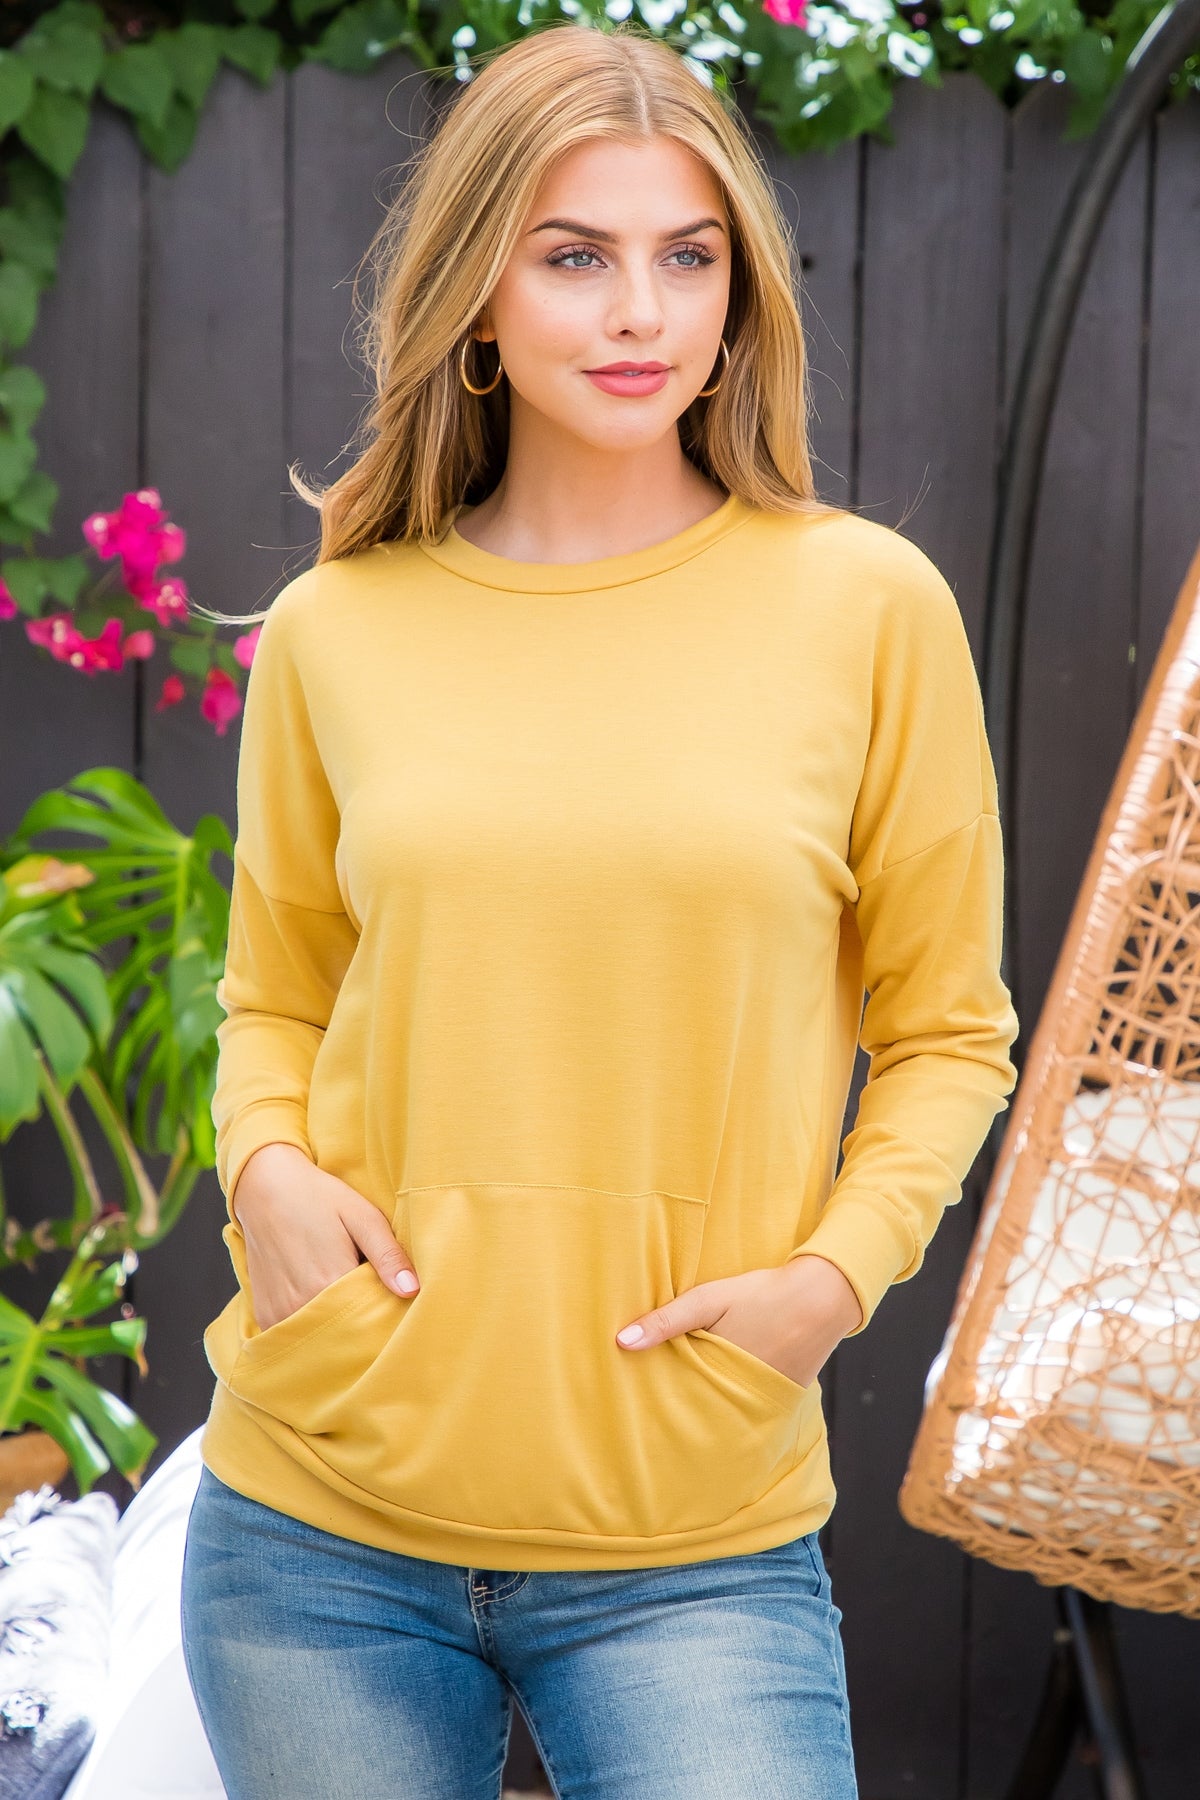 PLUS SIZE LONG SLEEVE FRENCH TERRY TOP WITH KANGAROO POCKET TOP 3-2-1